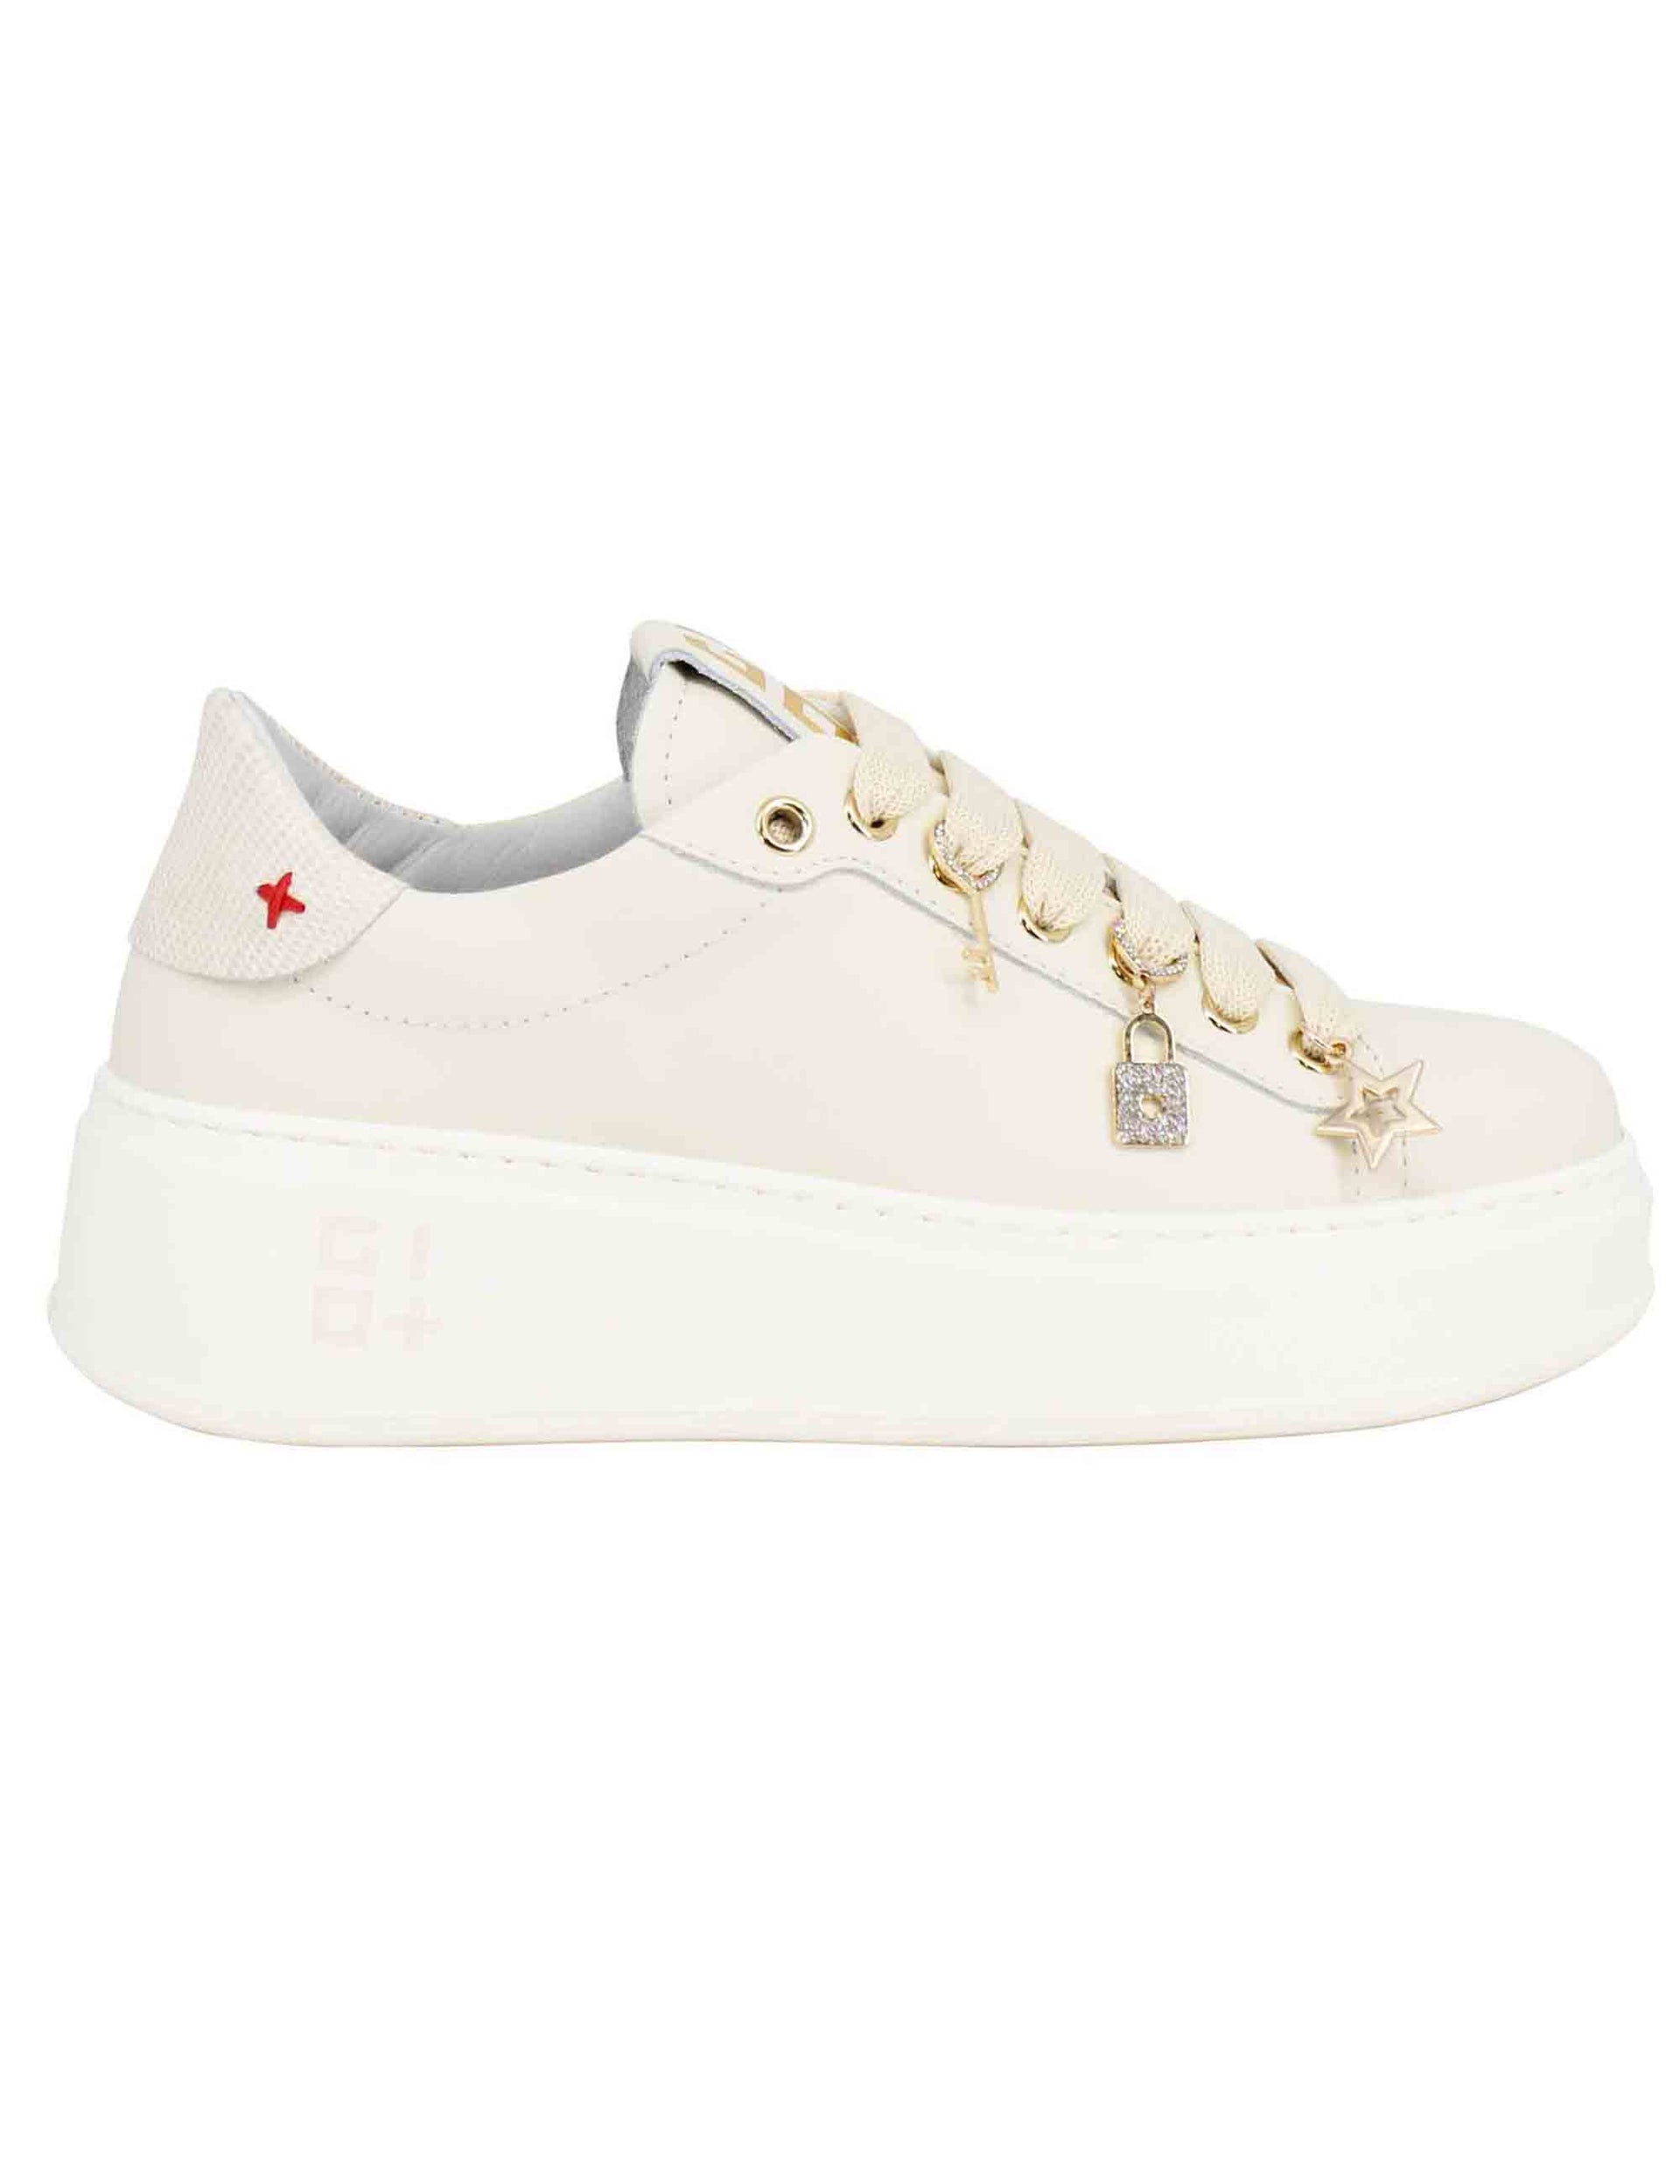 Women's beige leather sneakers with jewel charms and high sole